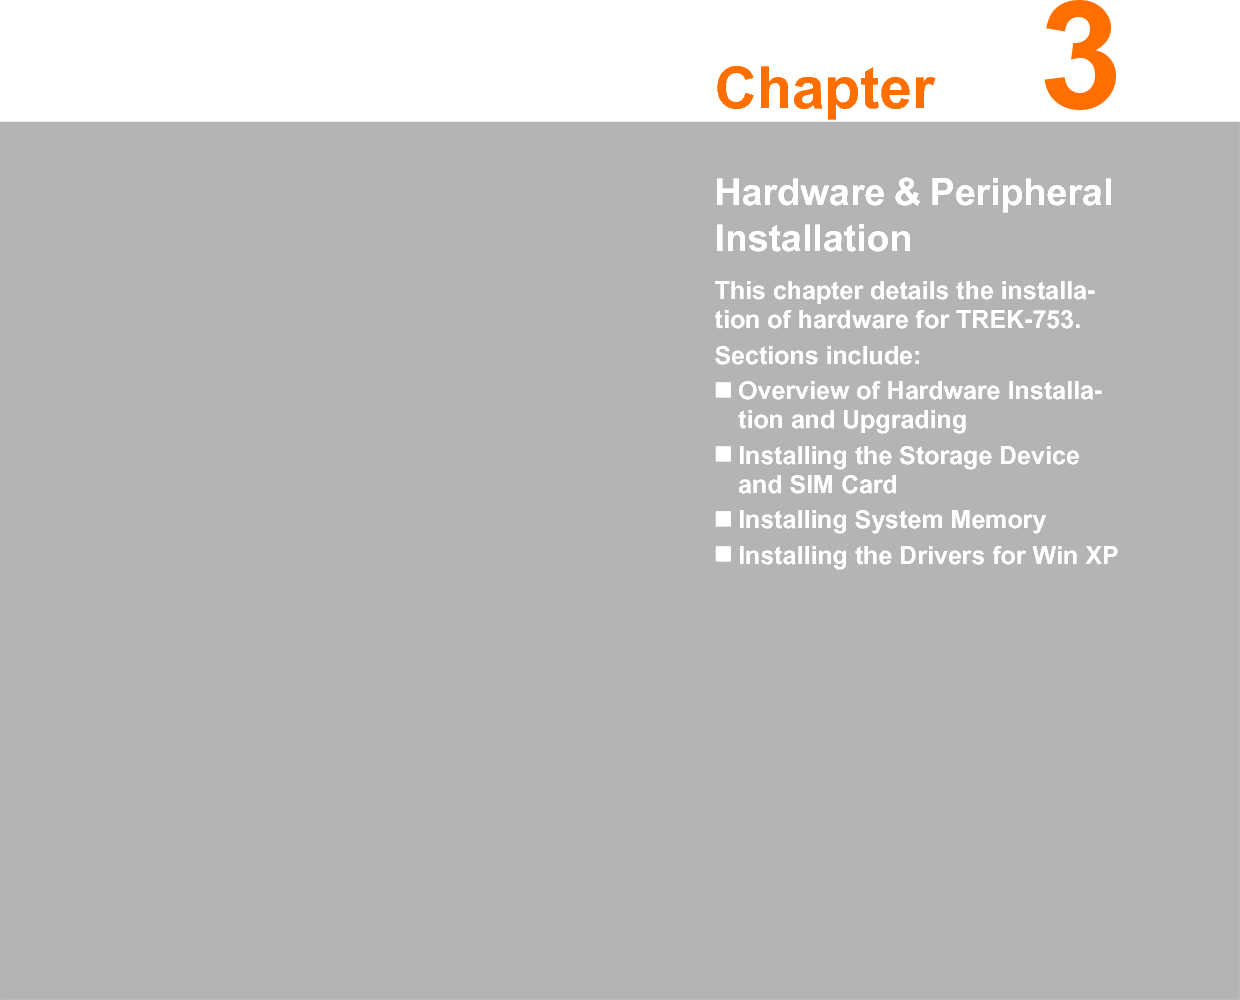 Chapter 33Hardware &amp; Peripheral InstallationThis chapter details the installa-tion of hardware for TREK-753.Sections include:Overview of Hardware Installa-tion and UpgradingInstalling the Storage Device and SIM CardInstalling System MemoryInstalling the Drivers for Win XP